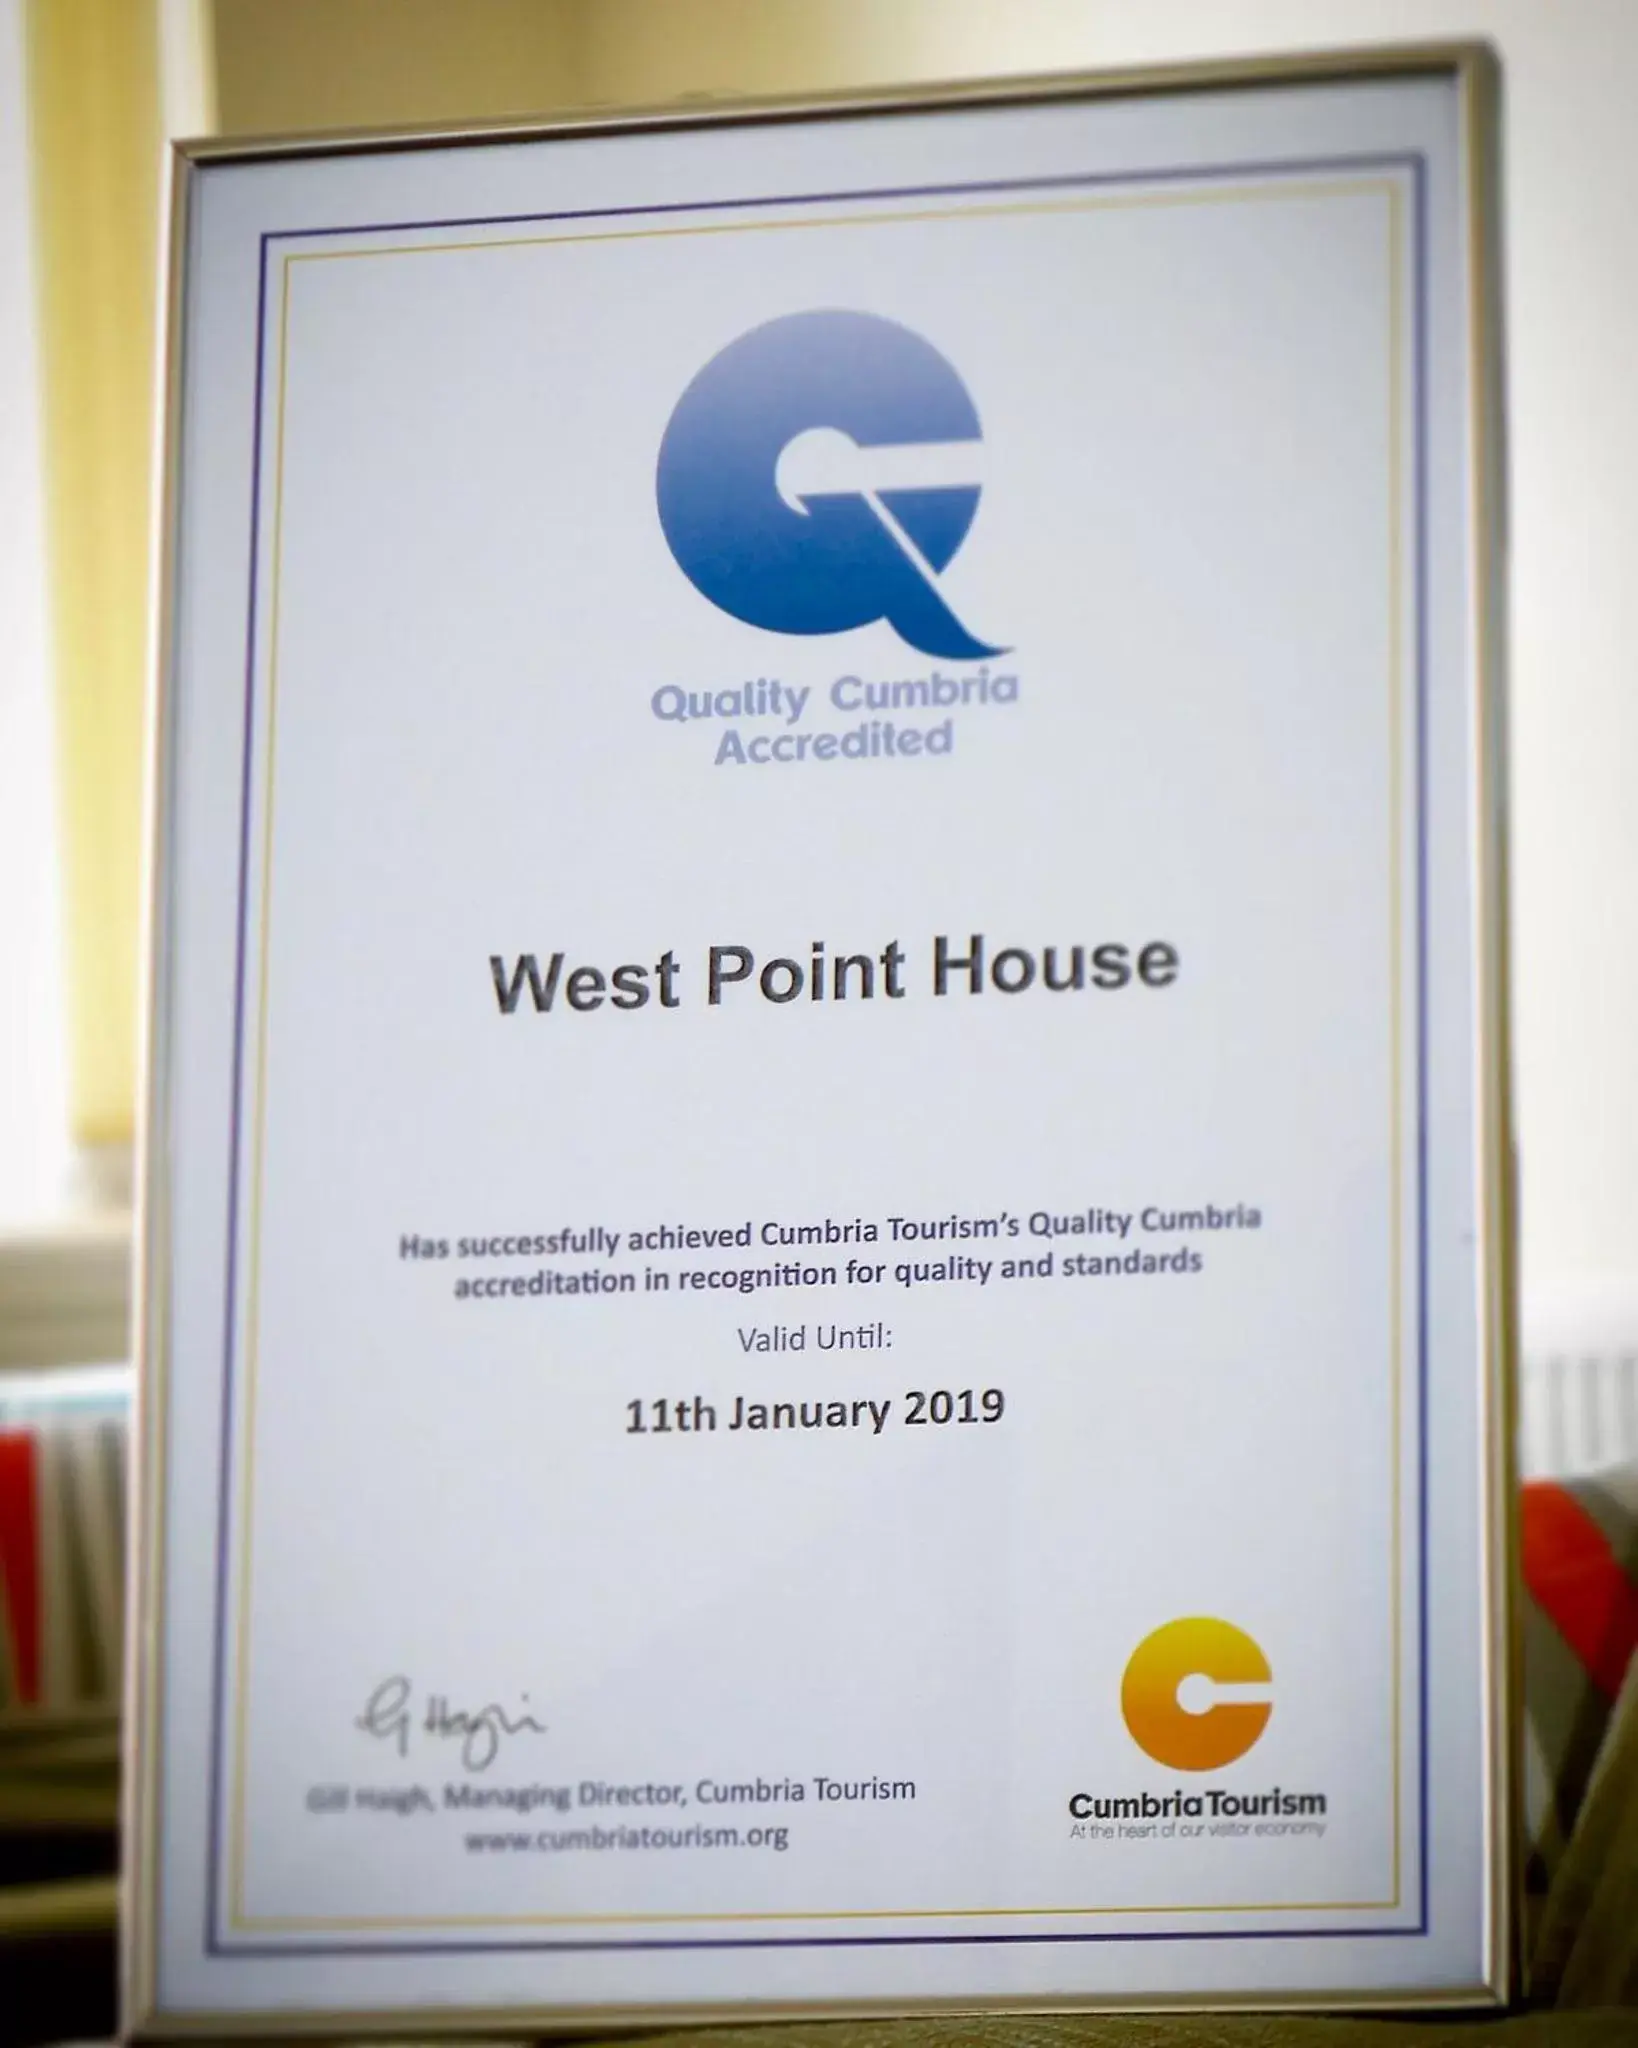 Certificate/Award in West Point House